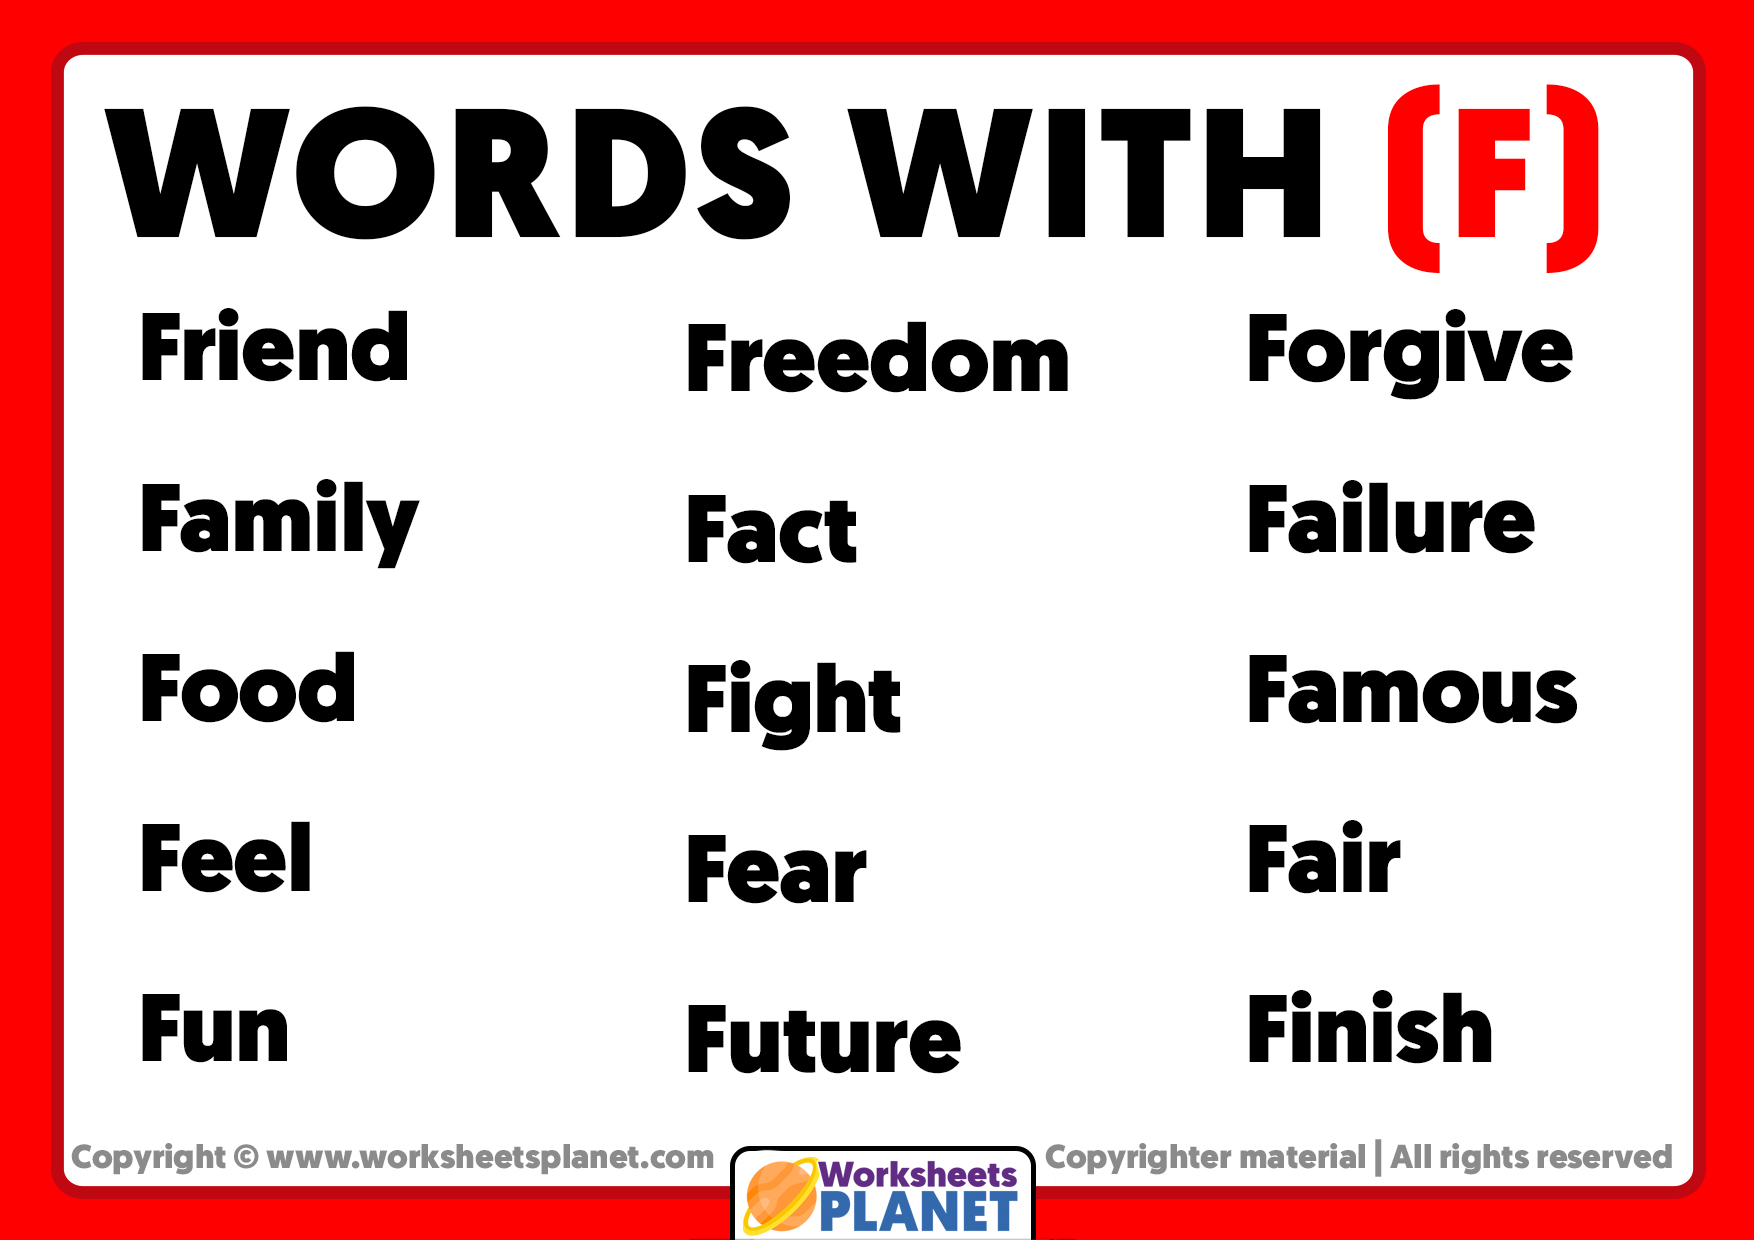 Words With F